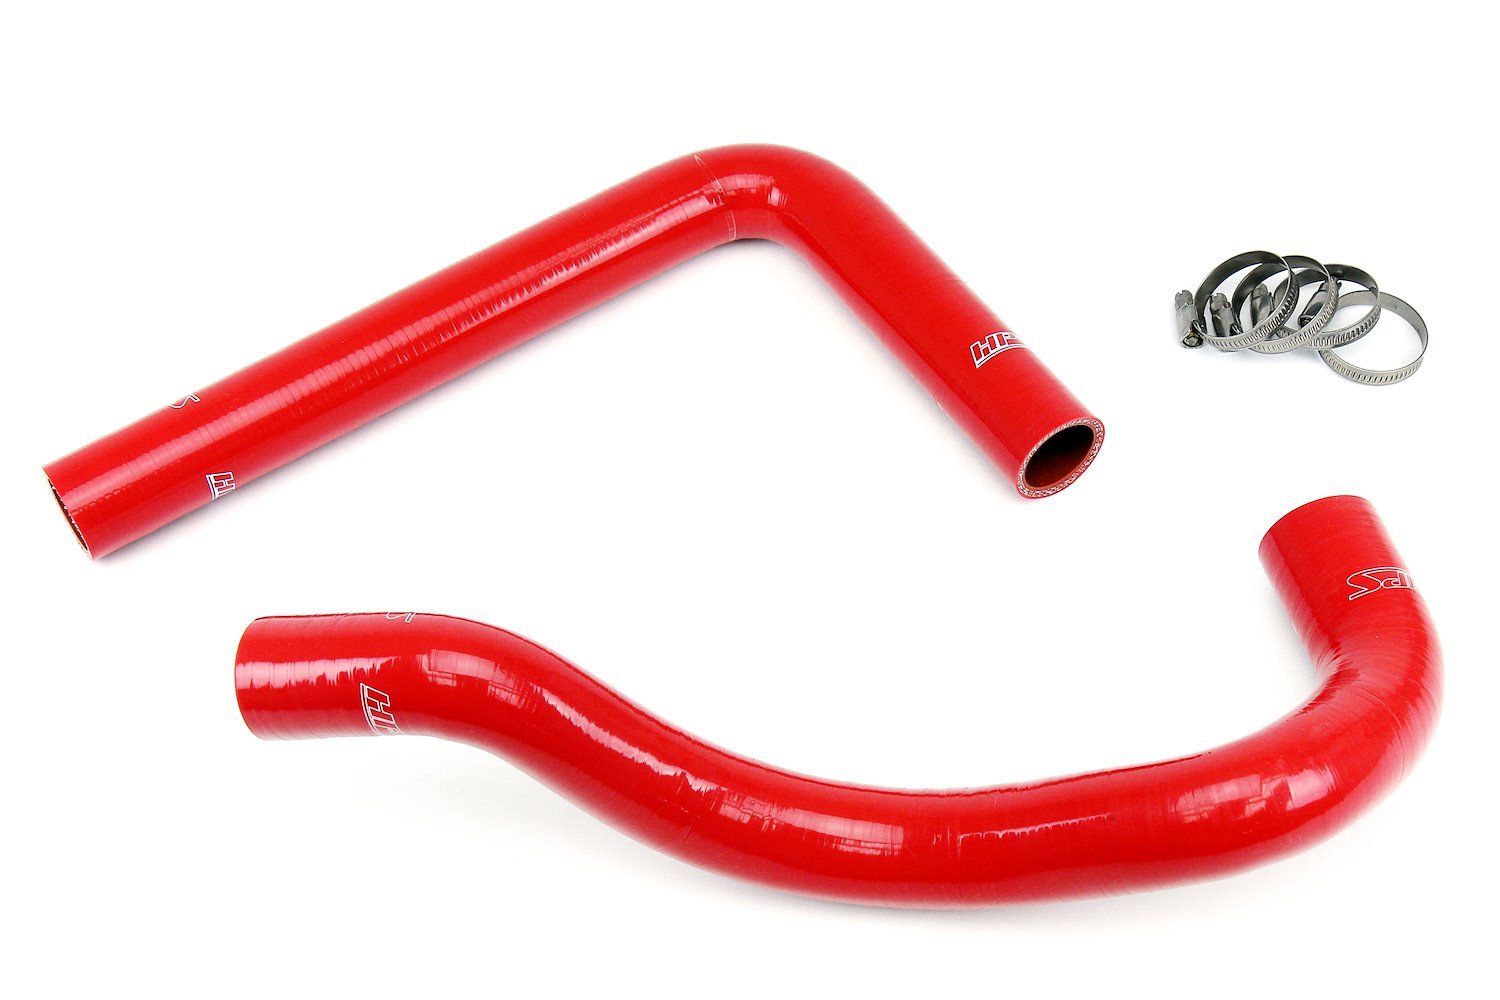 57-1924-RED Radiator Hose Kit, 3-Ply Reinforced Silicone, Replaces Rubber Radiator Coolant Hoses